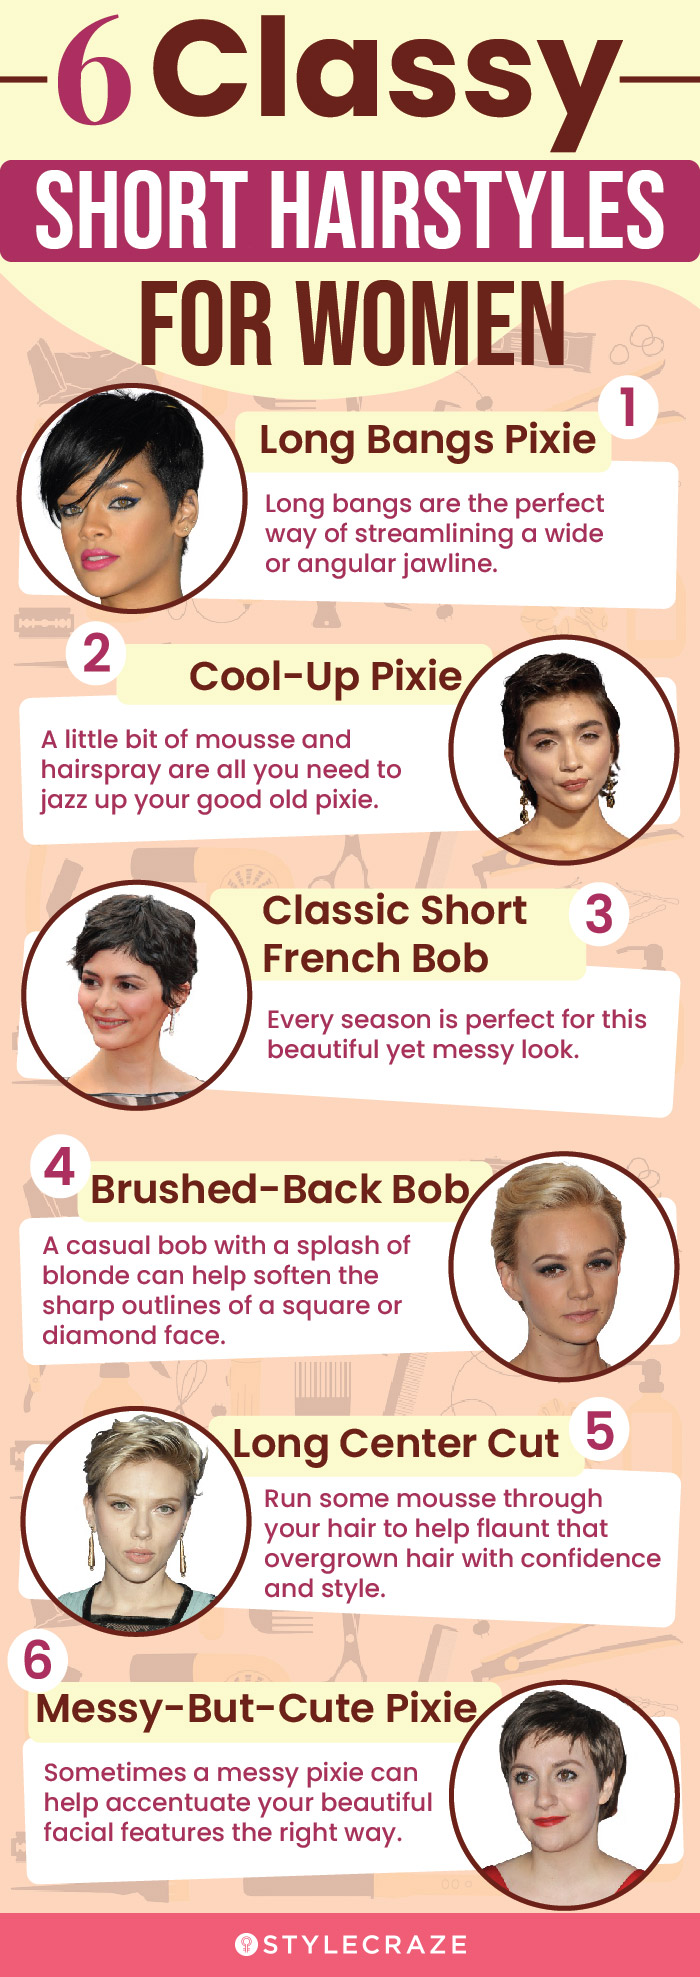 6 classy short hairstyles for women (infographic)